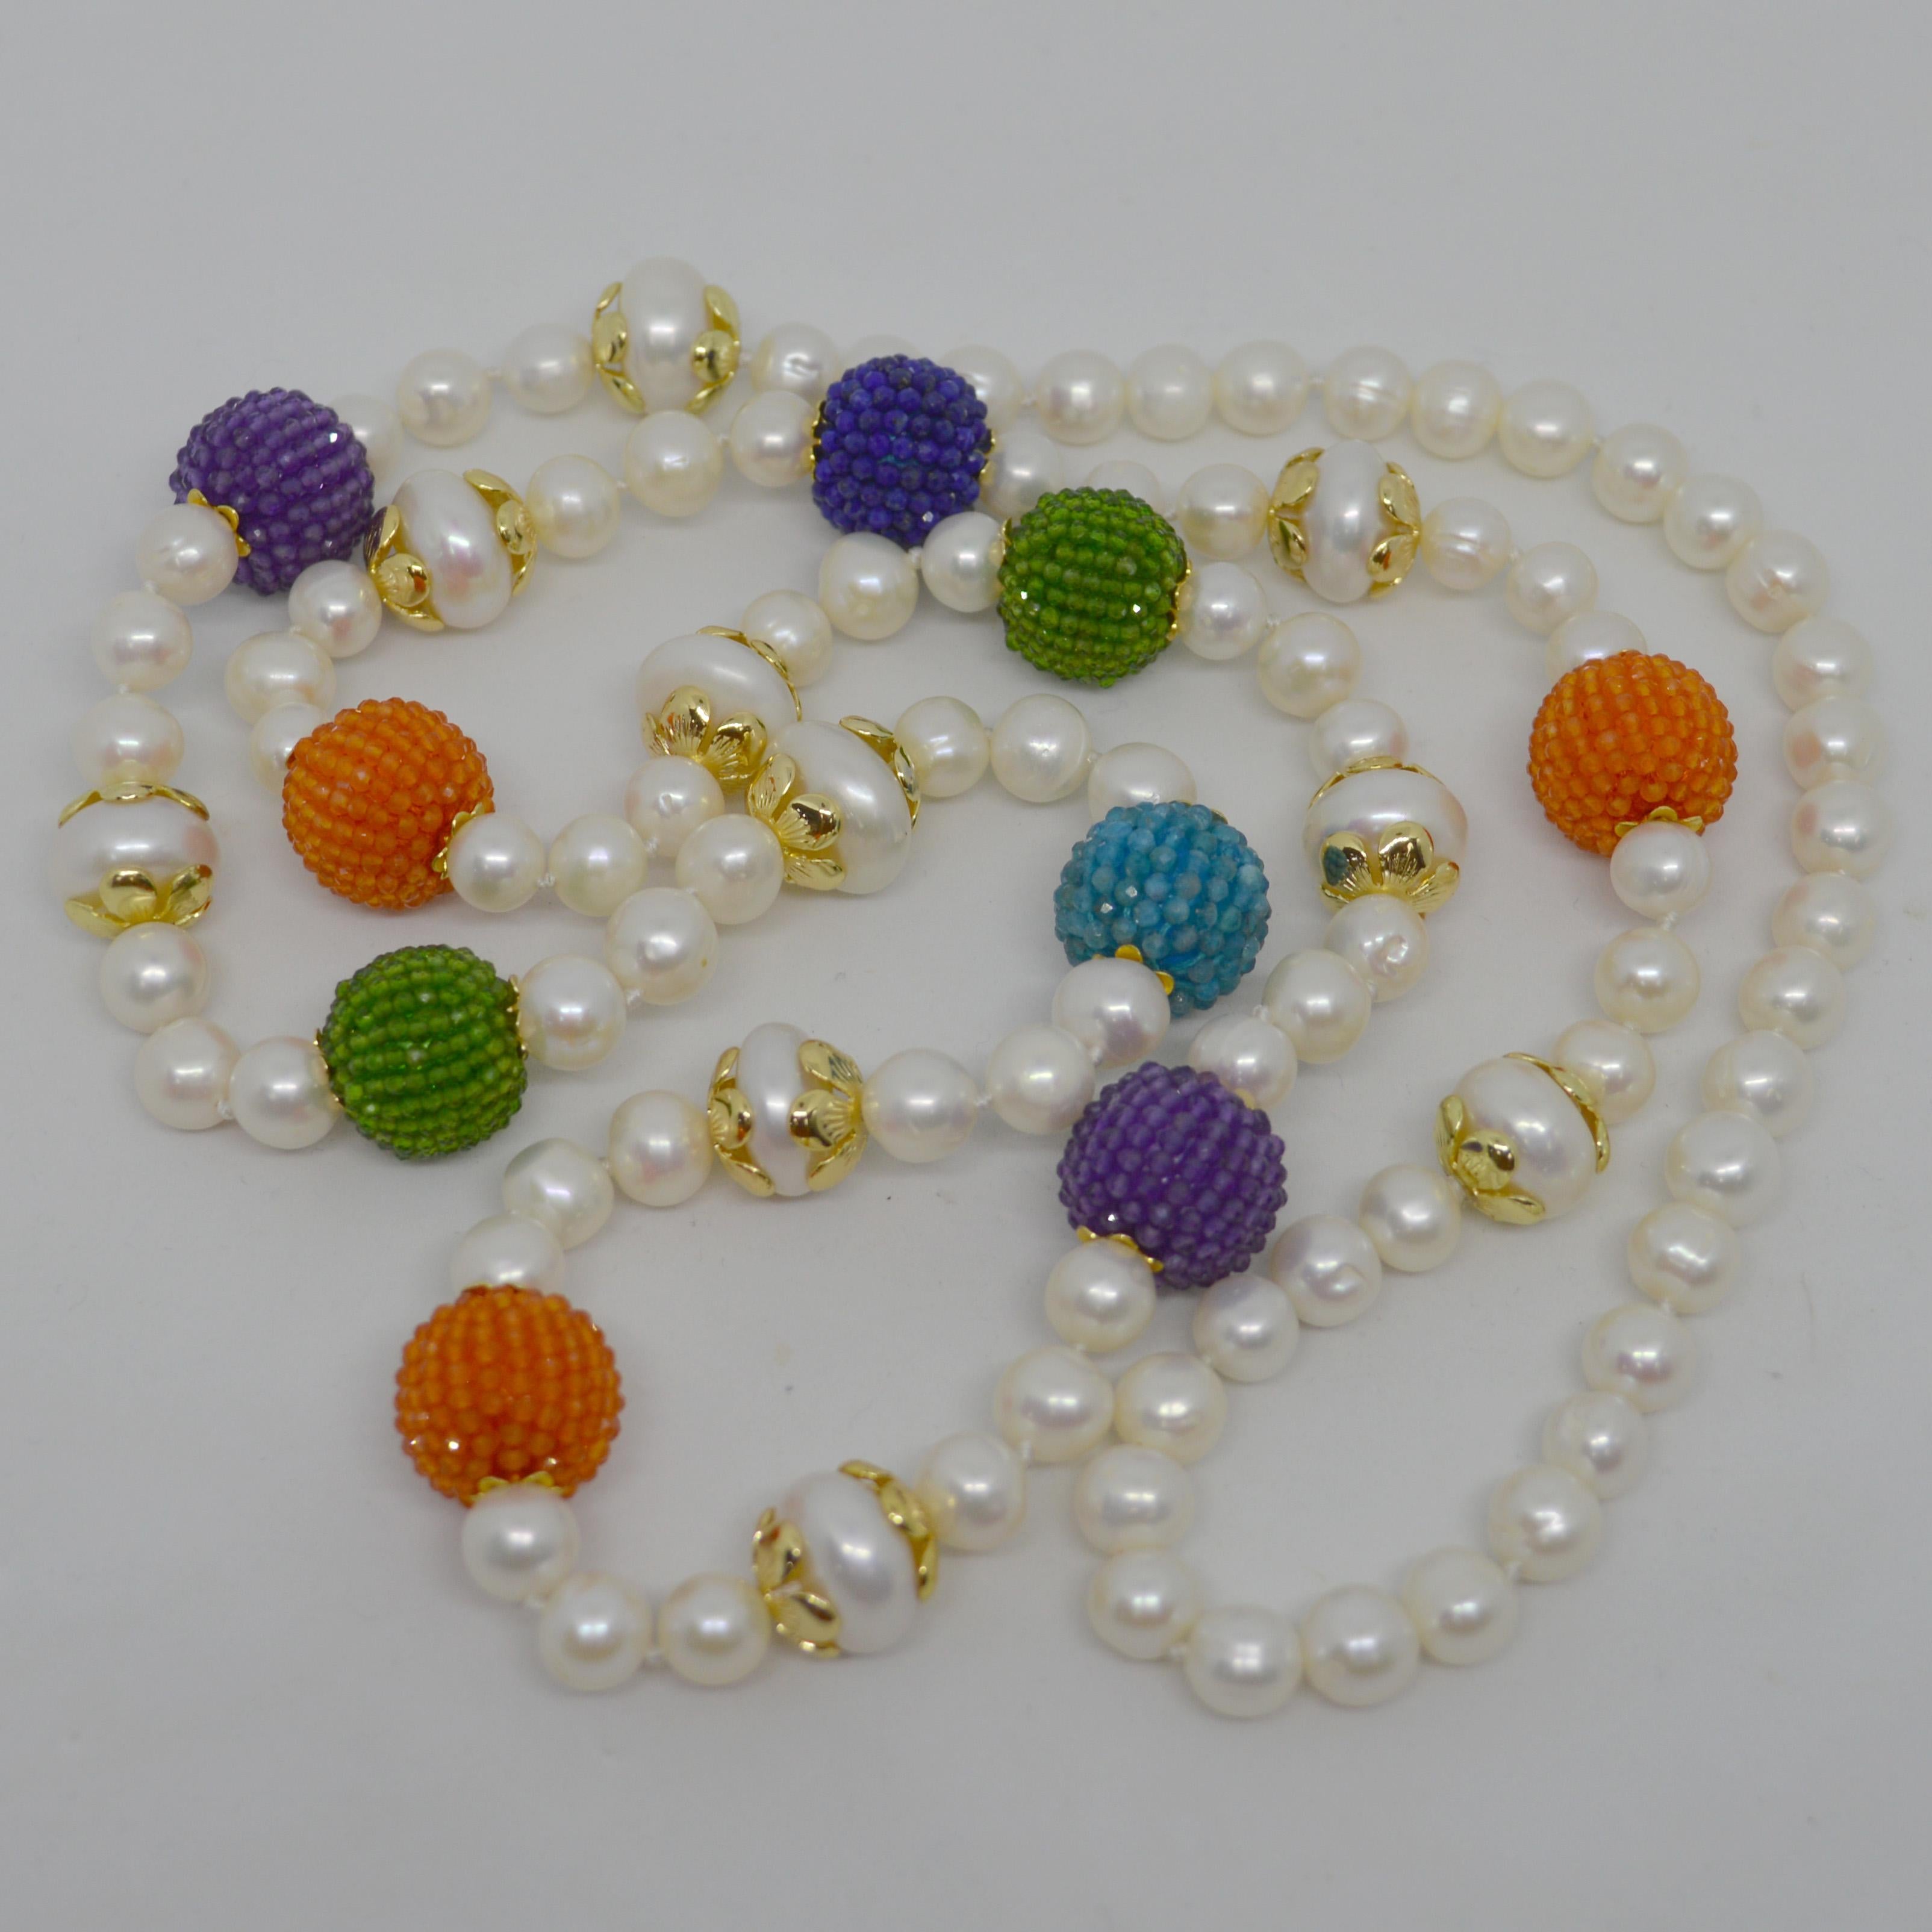  Add a statement necklace to take your outfit to the next level with this Beautiful and Graceful  Fresh Water Pearl Necklace consists of multi-colour faceted beaded gemstones. 

                   Description
                   86 x Fresh Water